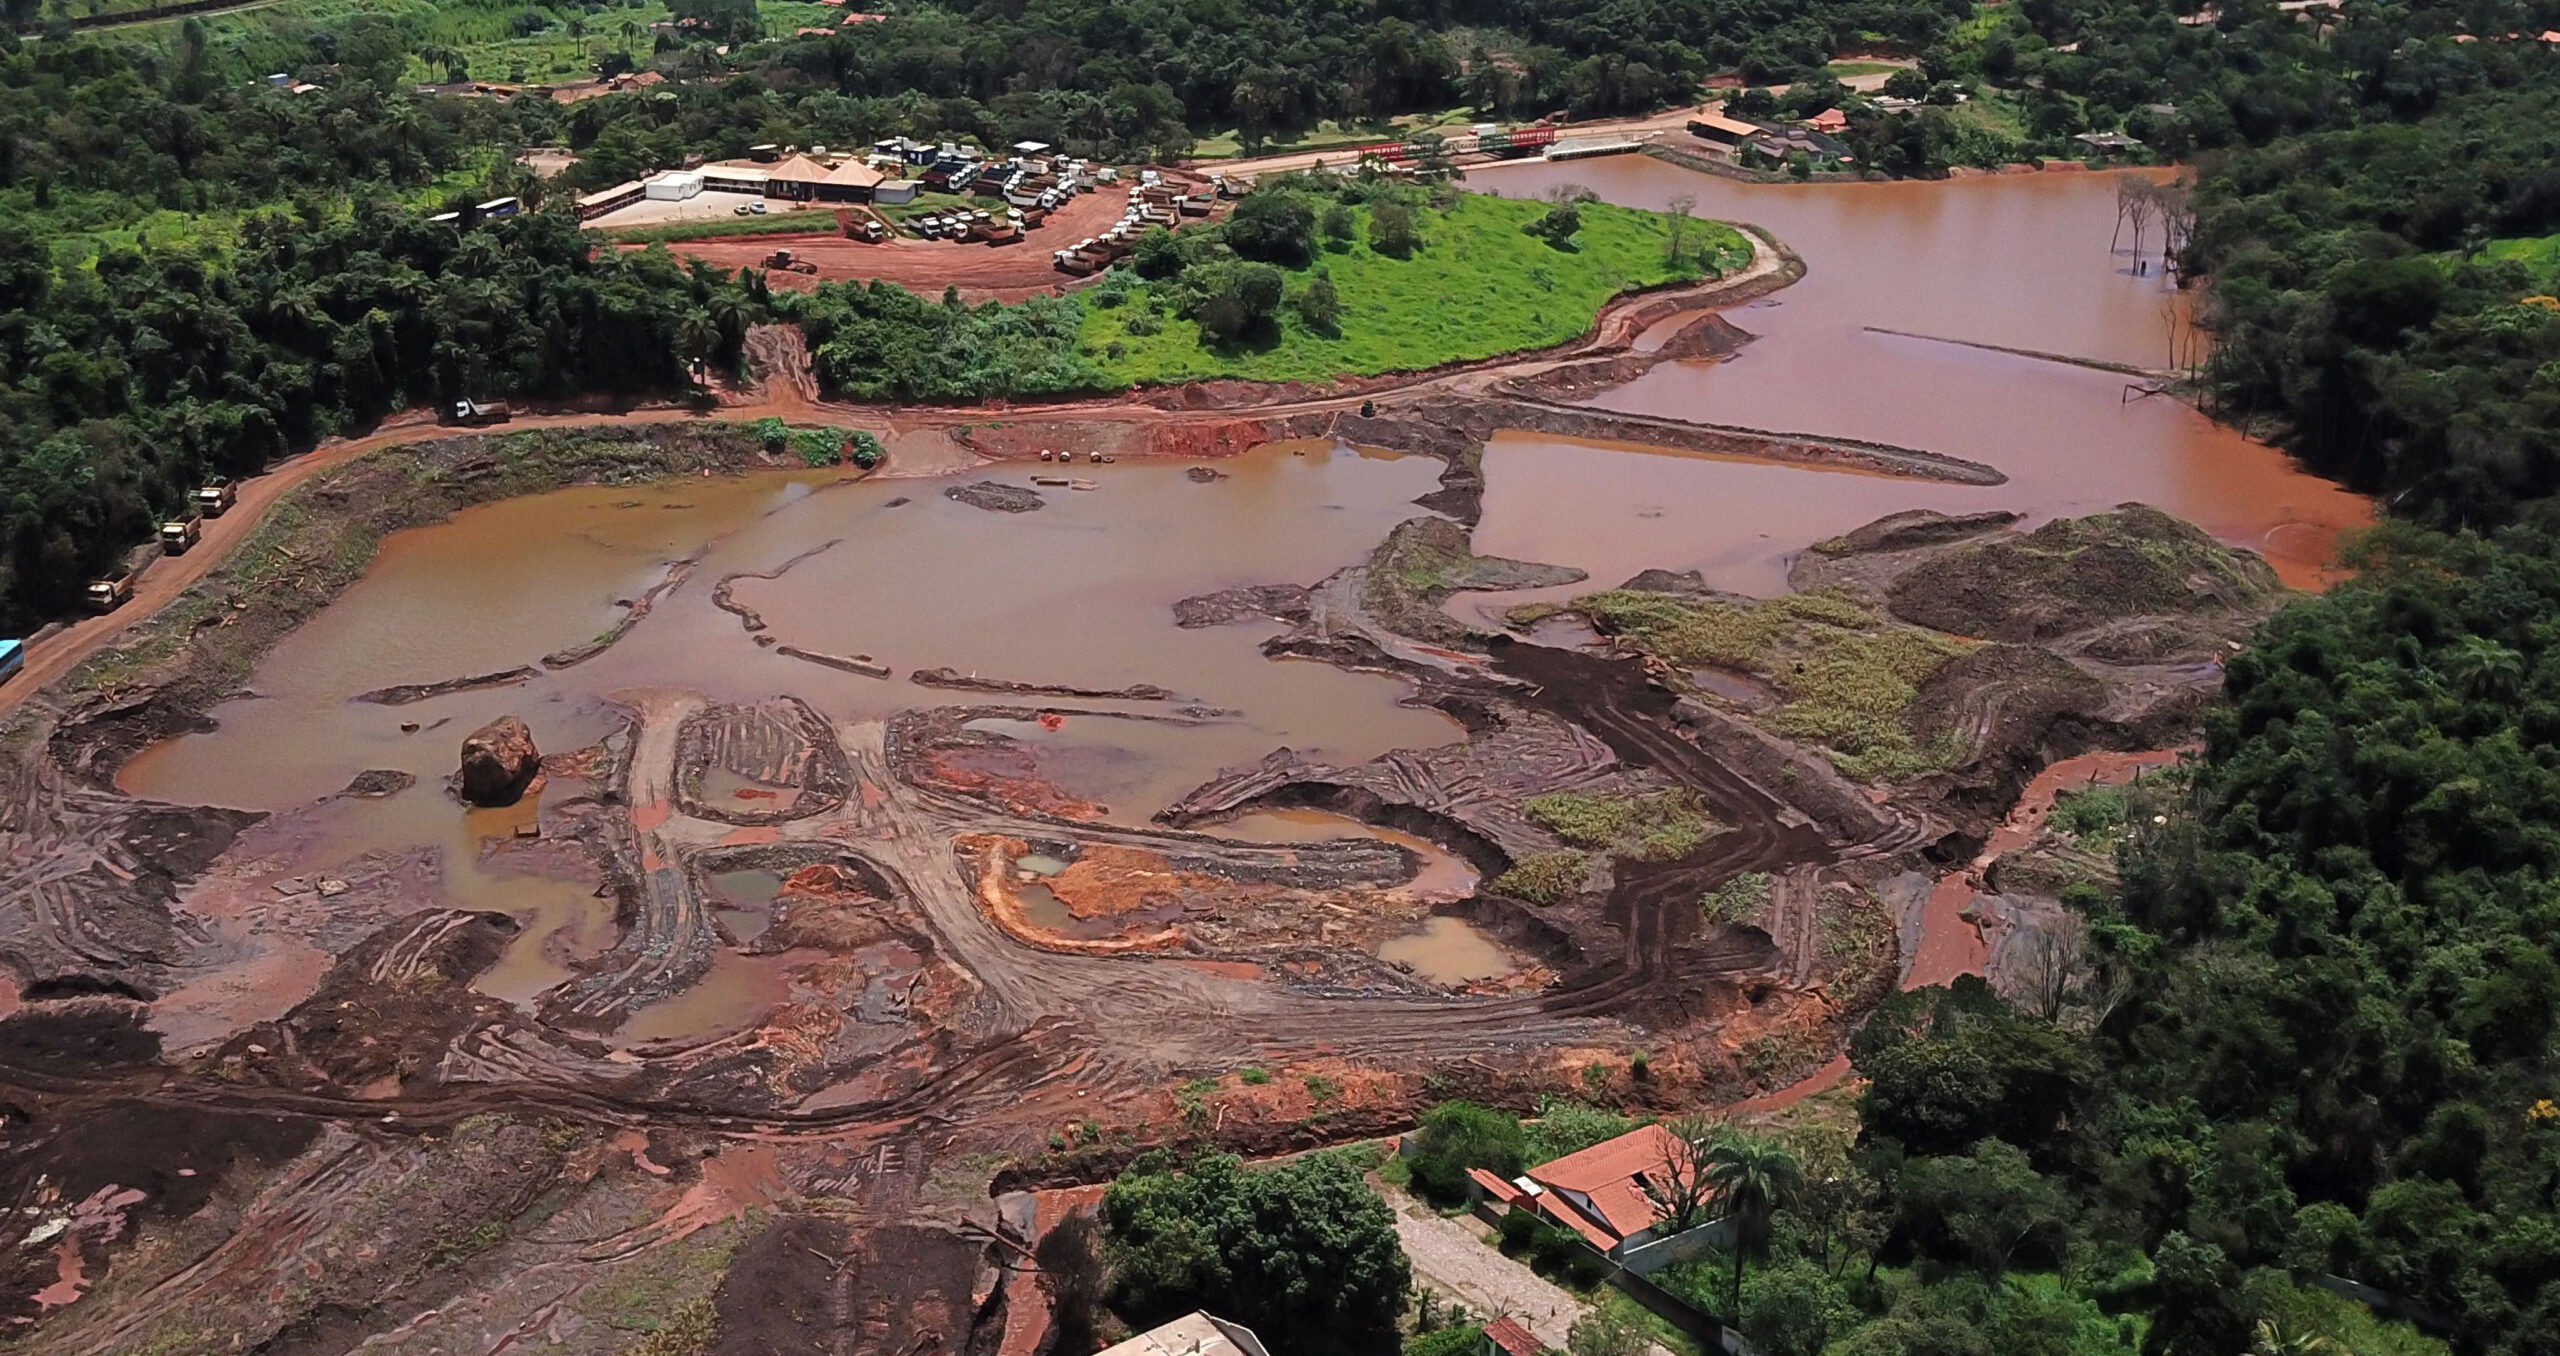 Parque da Cachoeira in Brazil was inundated by mining waste in 2019 following the collapse of the Brumadinho dam, owned by mining company Vale. In Europe, MEPs are debating what Oxfam has called “a once-in-a-generation opportunity to end corporate impunity”  (Photo: Douglas Magno/AFP via Getty Images) 